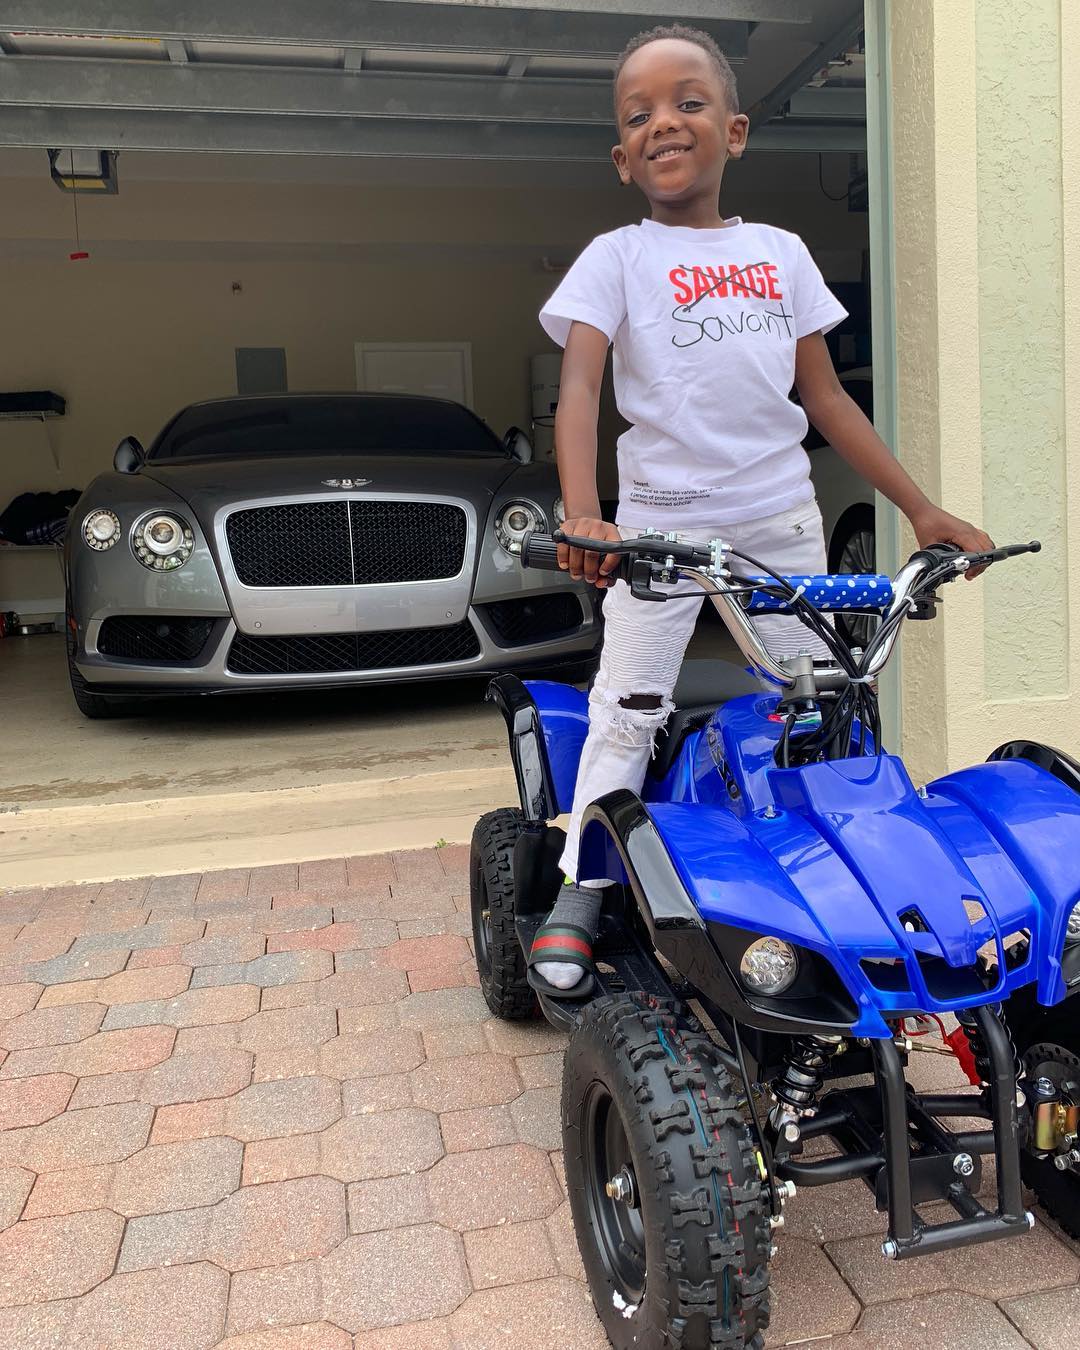 9YearOld Rapper Super Siah Boasts Impressive Car Collection, Is